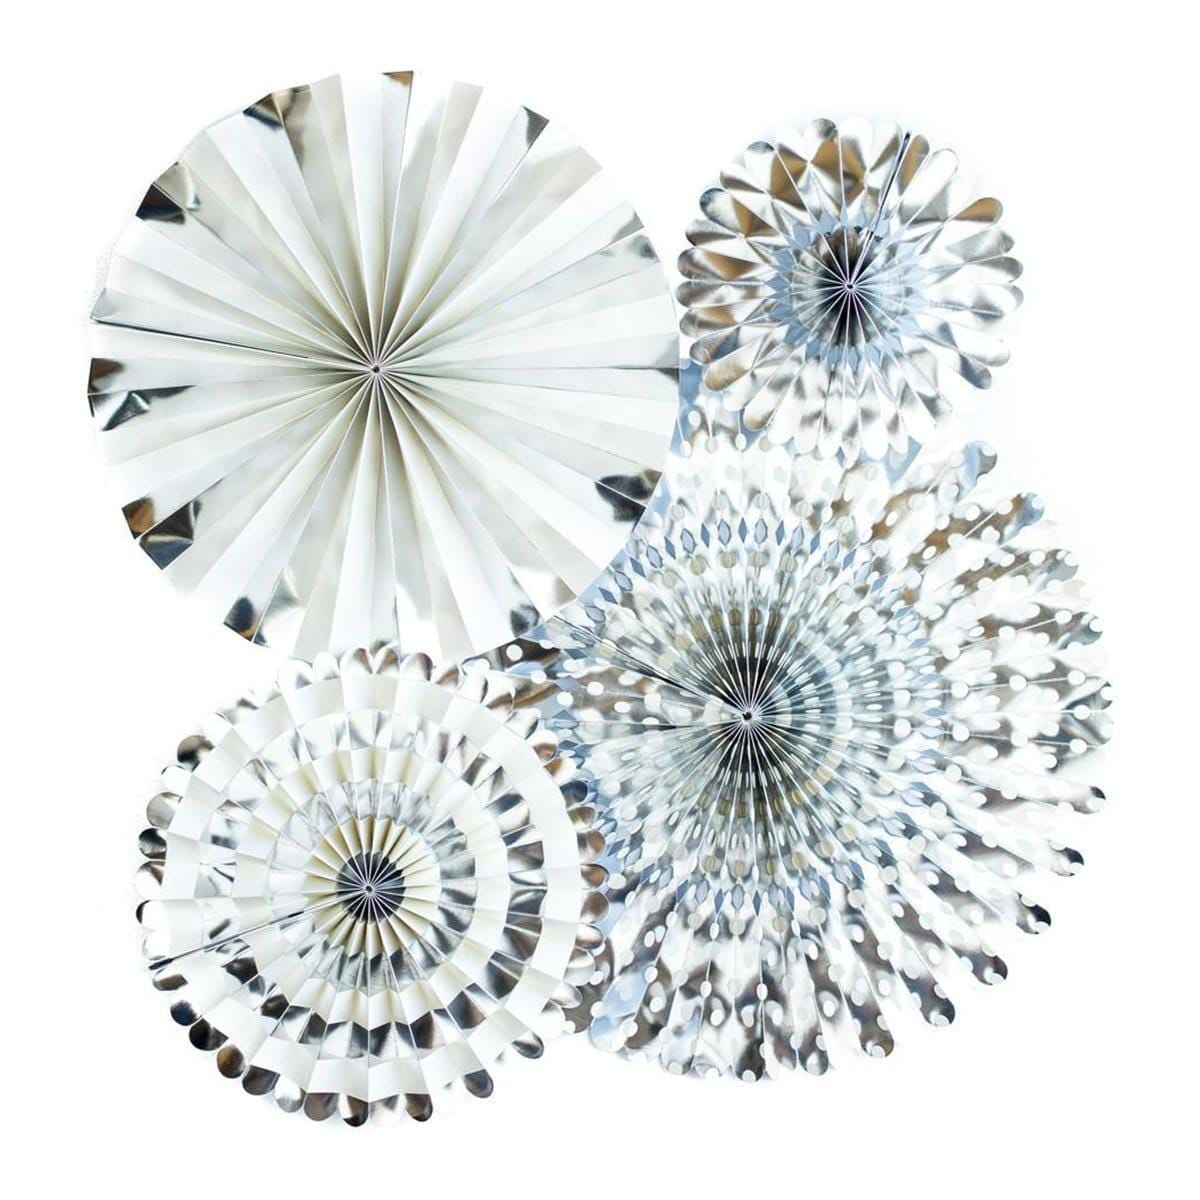 Buy Decorations Silver - Party Fans 4/pkg sold at Party Expert